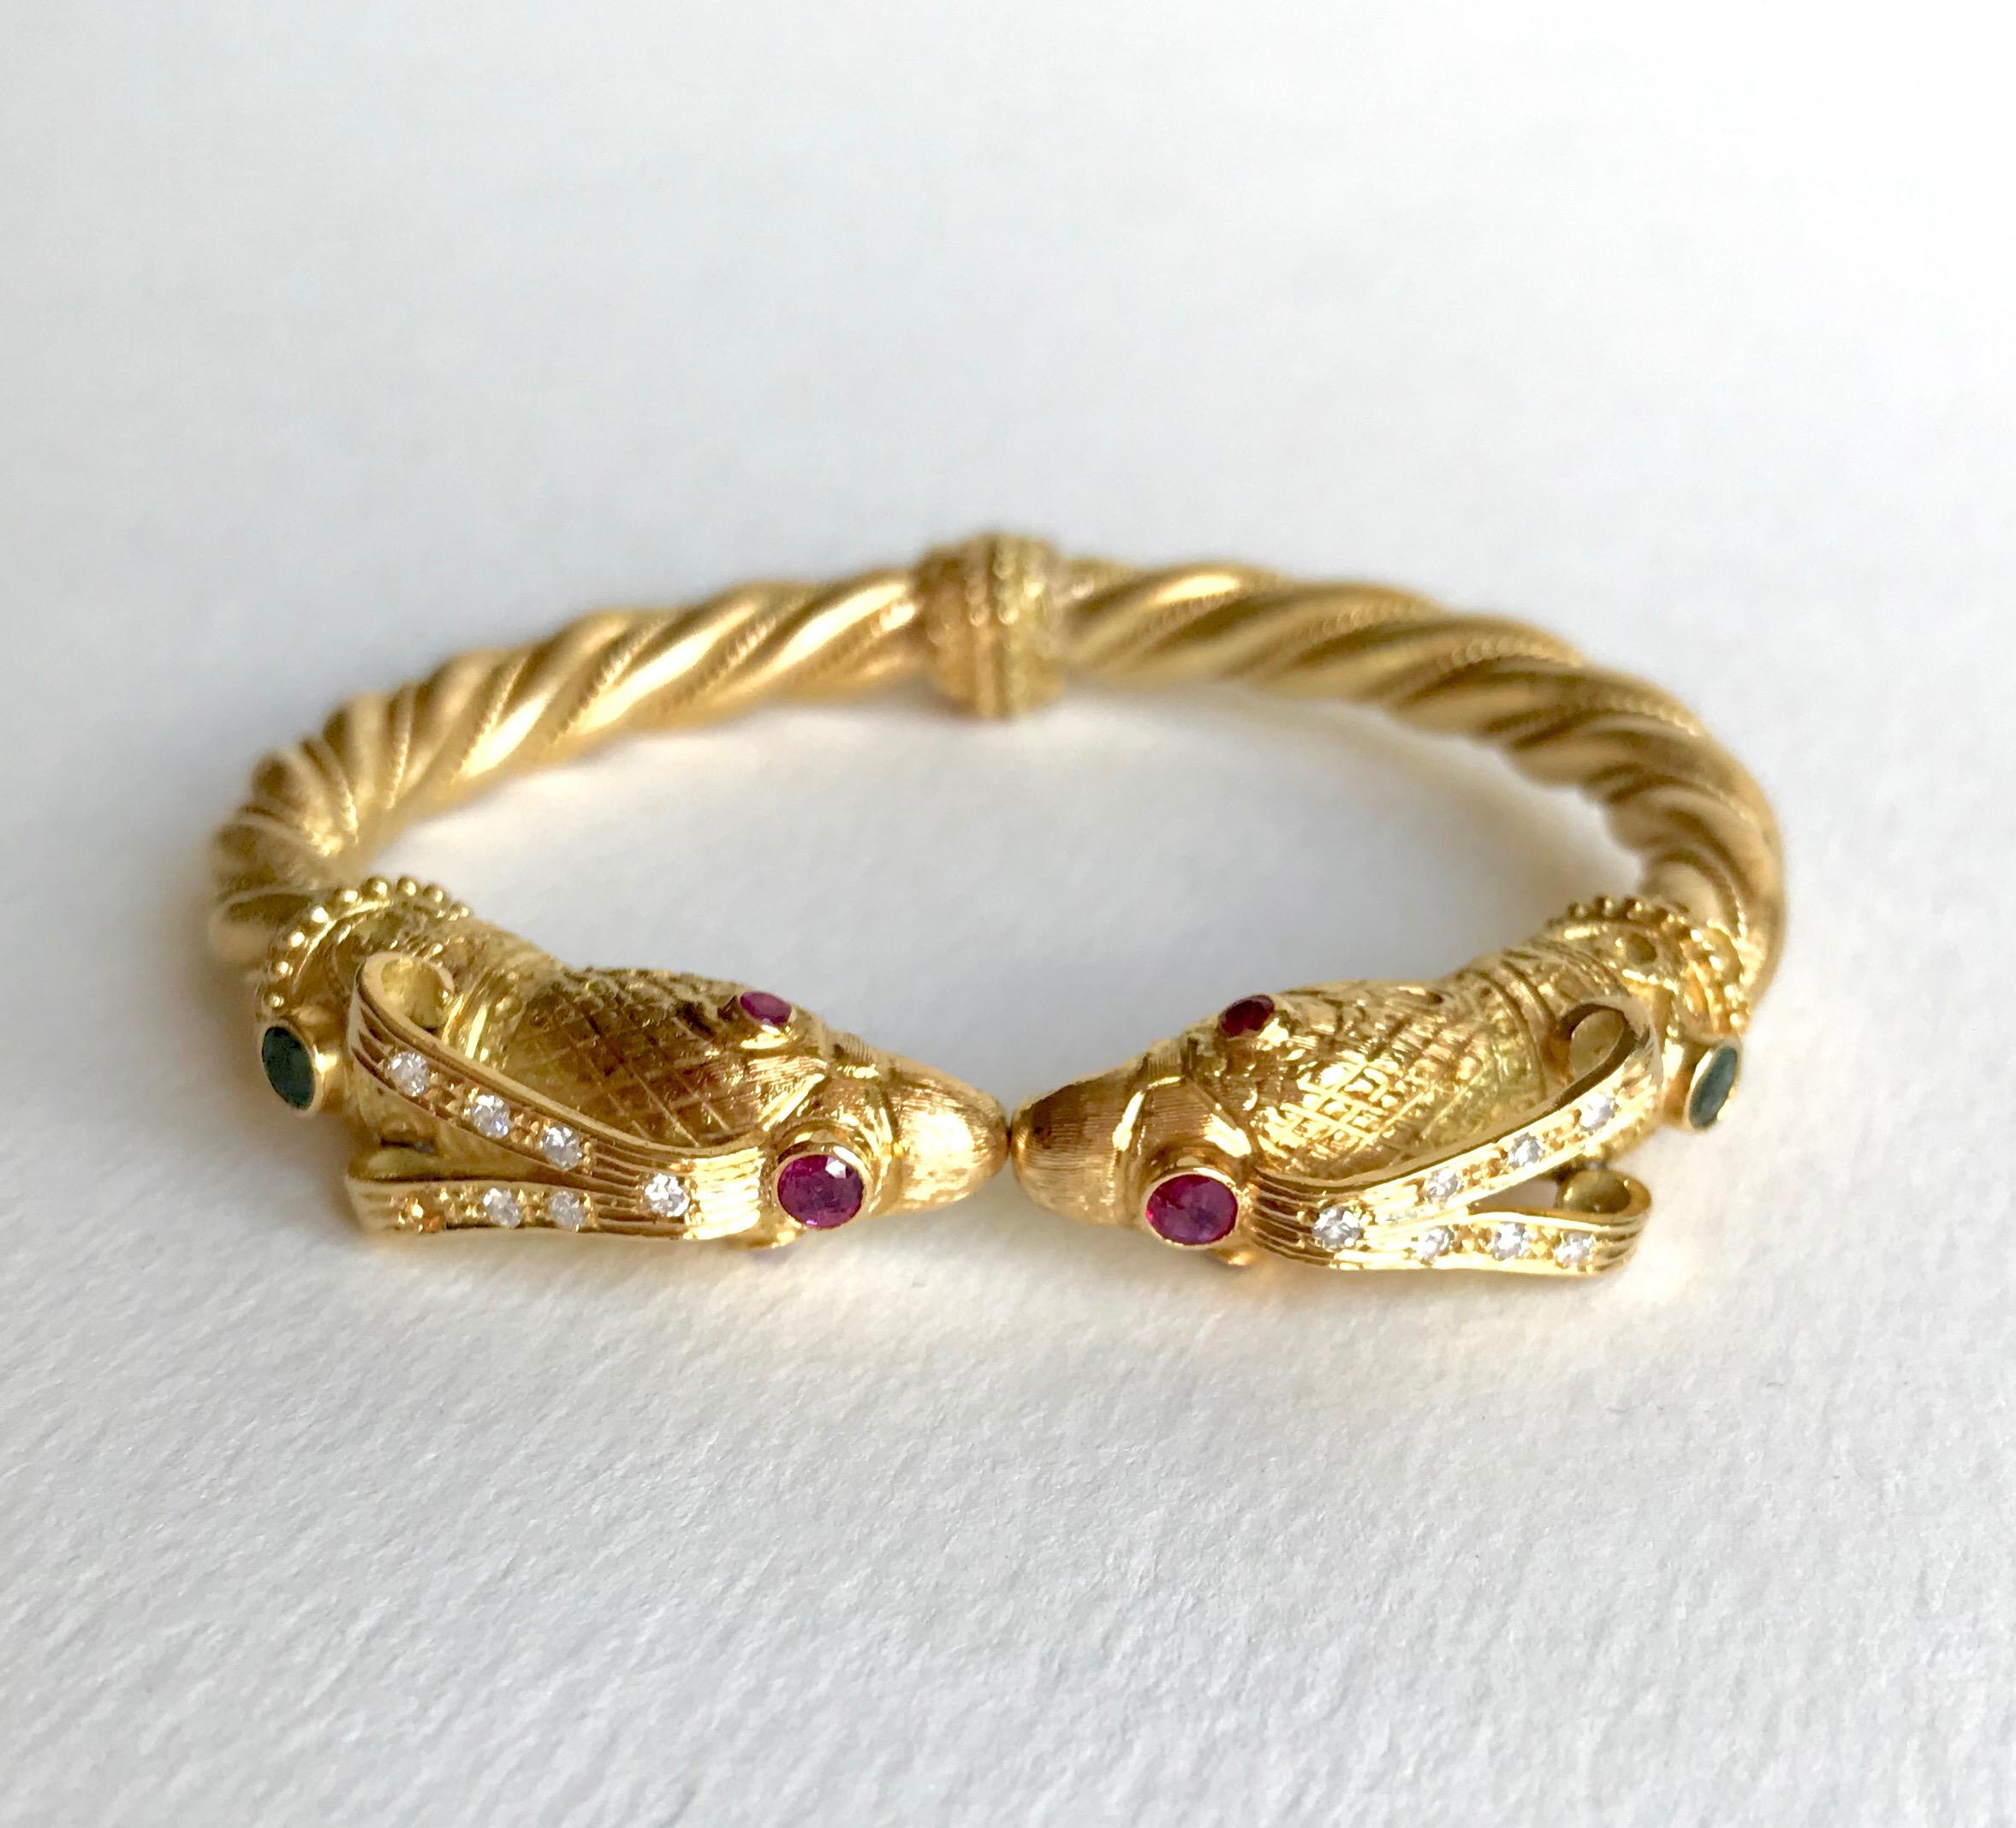 LALAOUNIS 18 carats yellow Gold, Emeralds, Rubies and Diamonds.
18 Carat yellow Gold LALAOUNIS folding hard Bracelet featuring two Eagle Heads facing each other, setting an Emerald, a Ruby ​​and seven Diamonds on each Top, and two Rubies for each